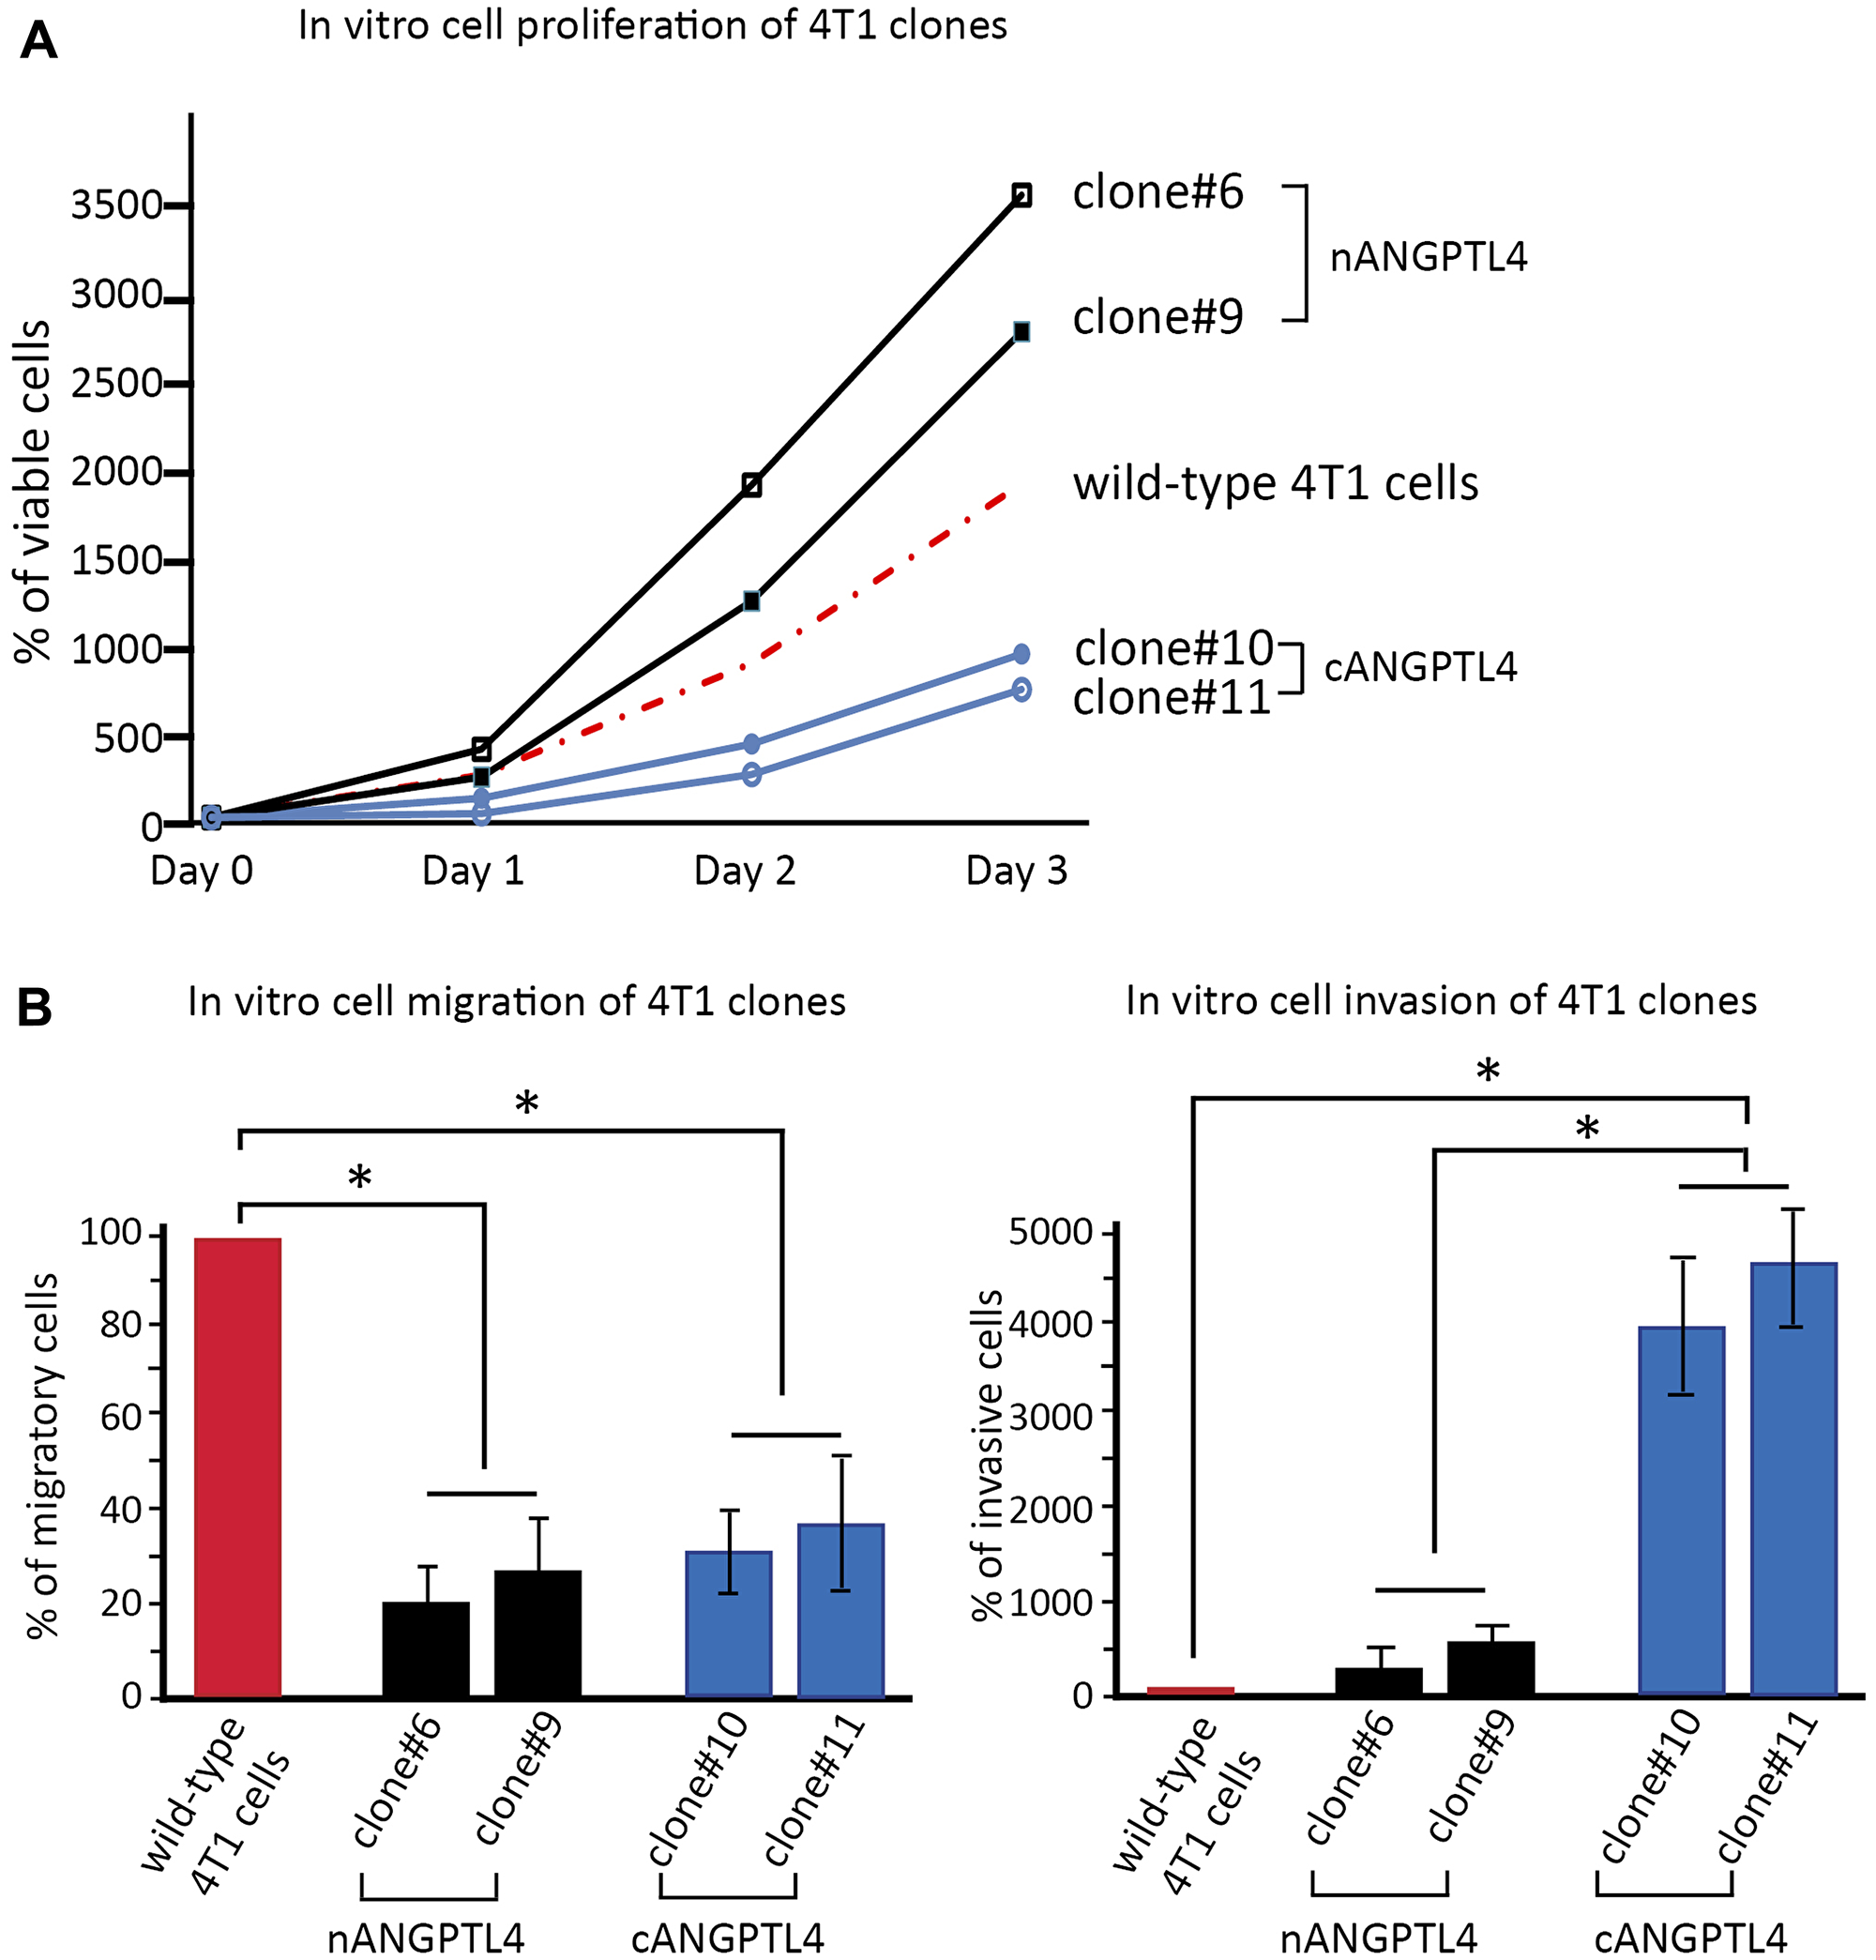 in vitro biological effects of c- and nANGPTL4 fragments on 4T1 murine breast cancer cells.